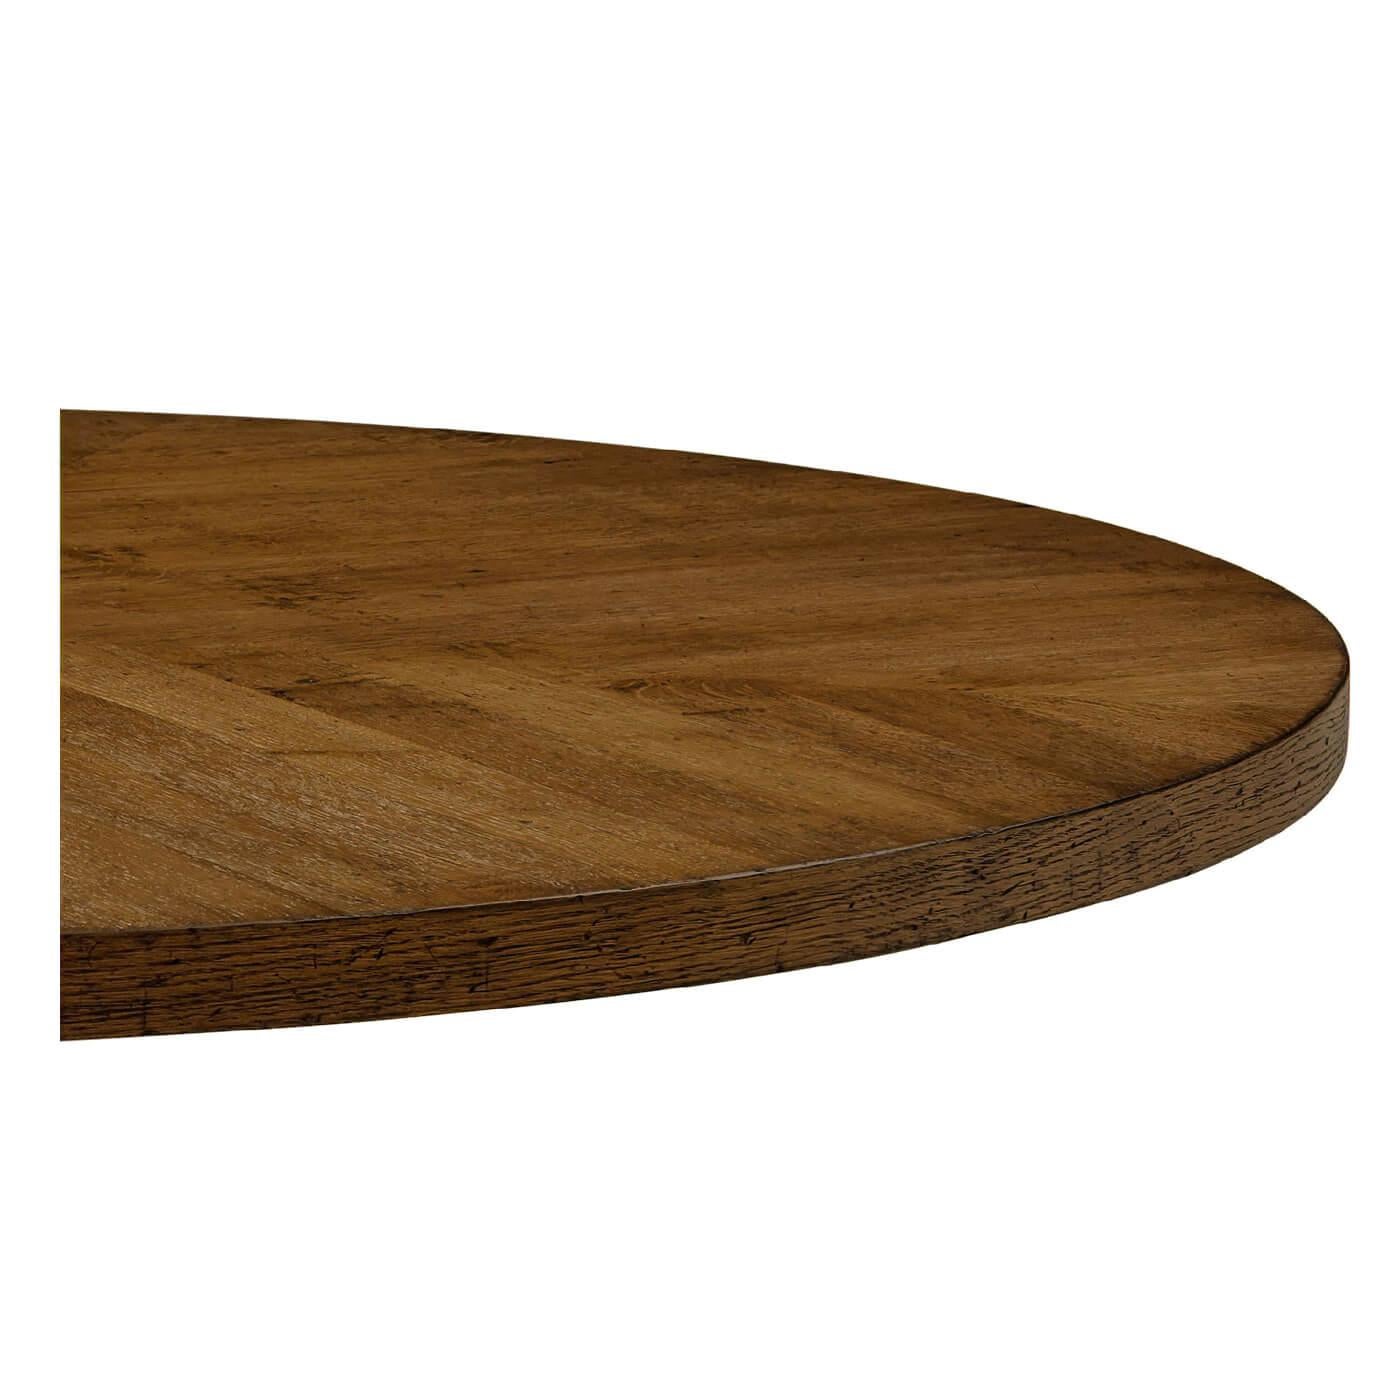 A dark oak parquetry round dining table with column pyramid base. This elegant table is detailed with a herringbone oak parquetry base and radial veneered top. It has been hand-made and given our Dusk finish.

Shown in Dusk Finish
Dimension
54